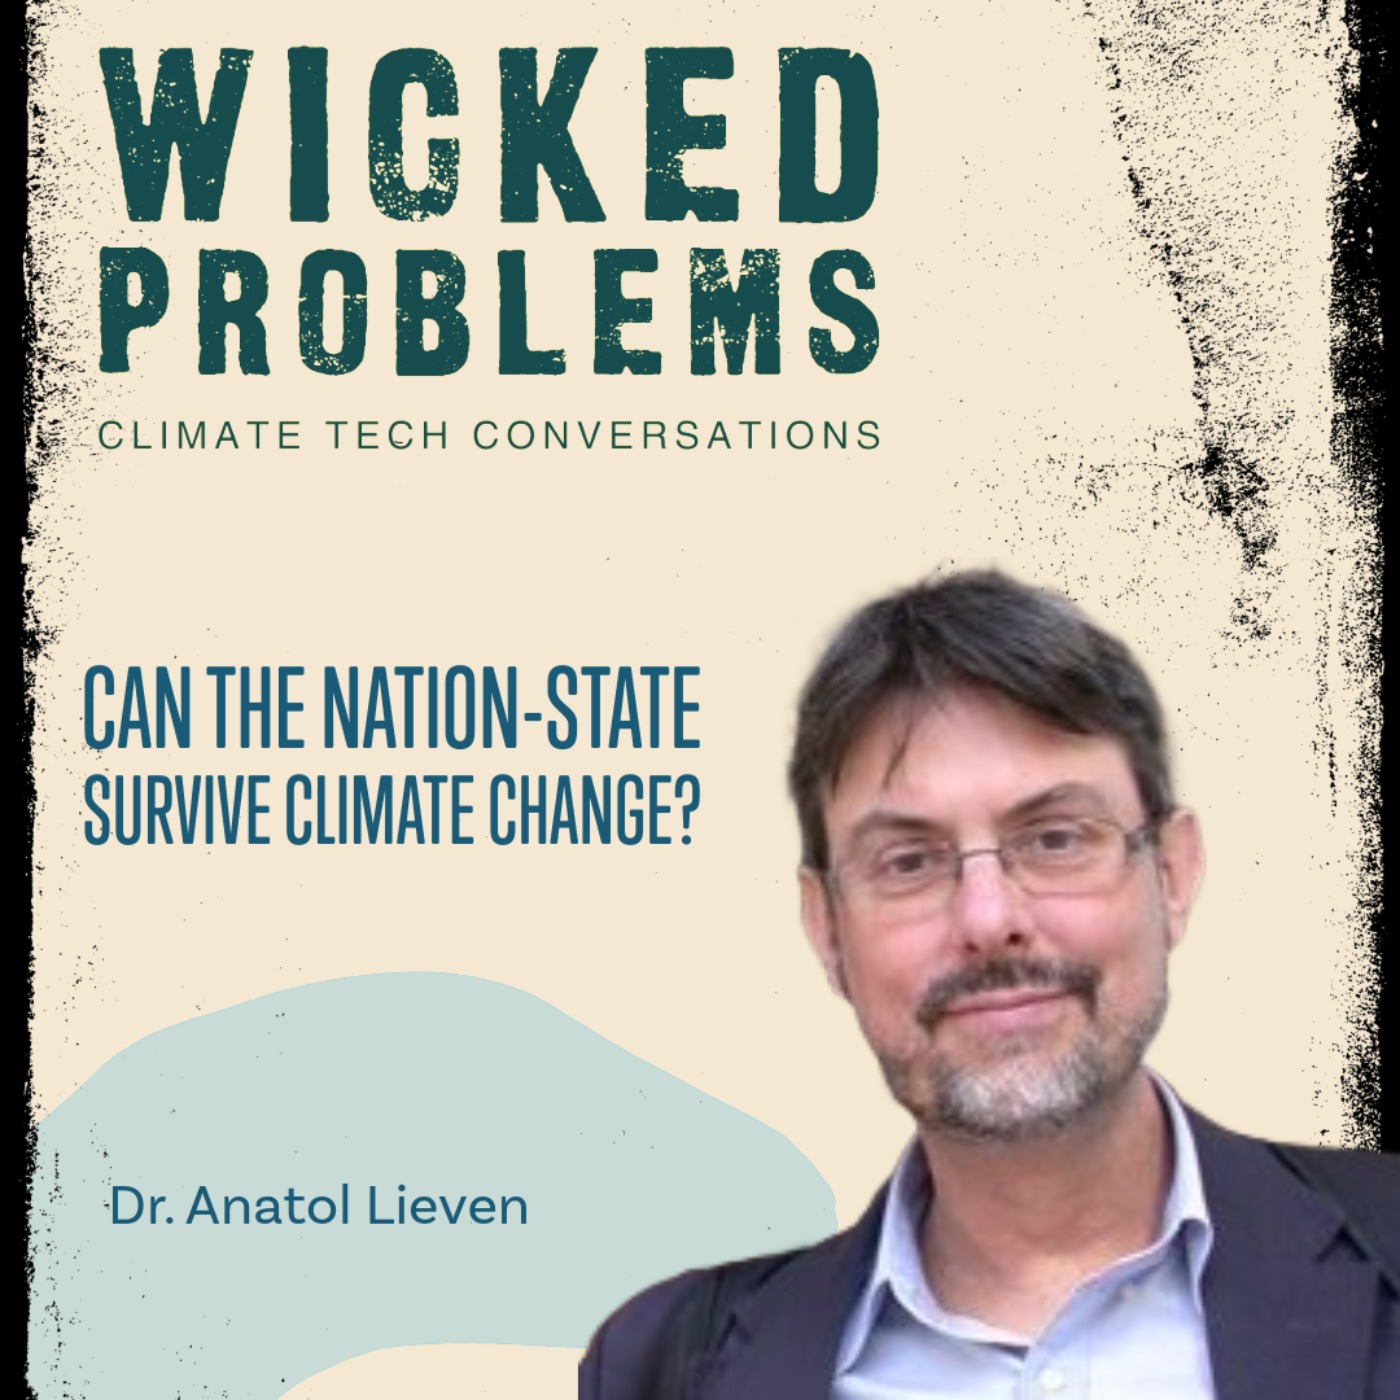 Dr. Anatol Lieven: Can the Nation-State survive climate change?